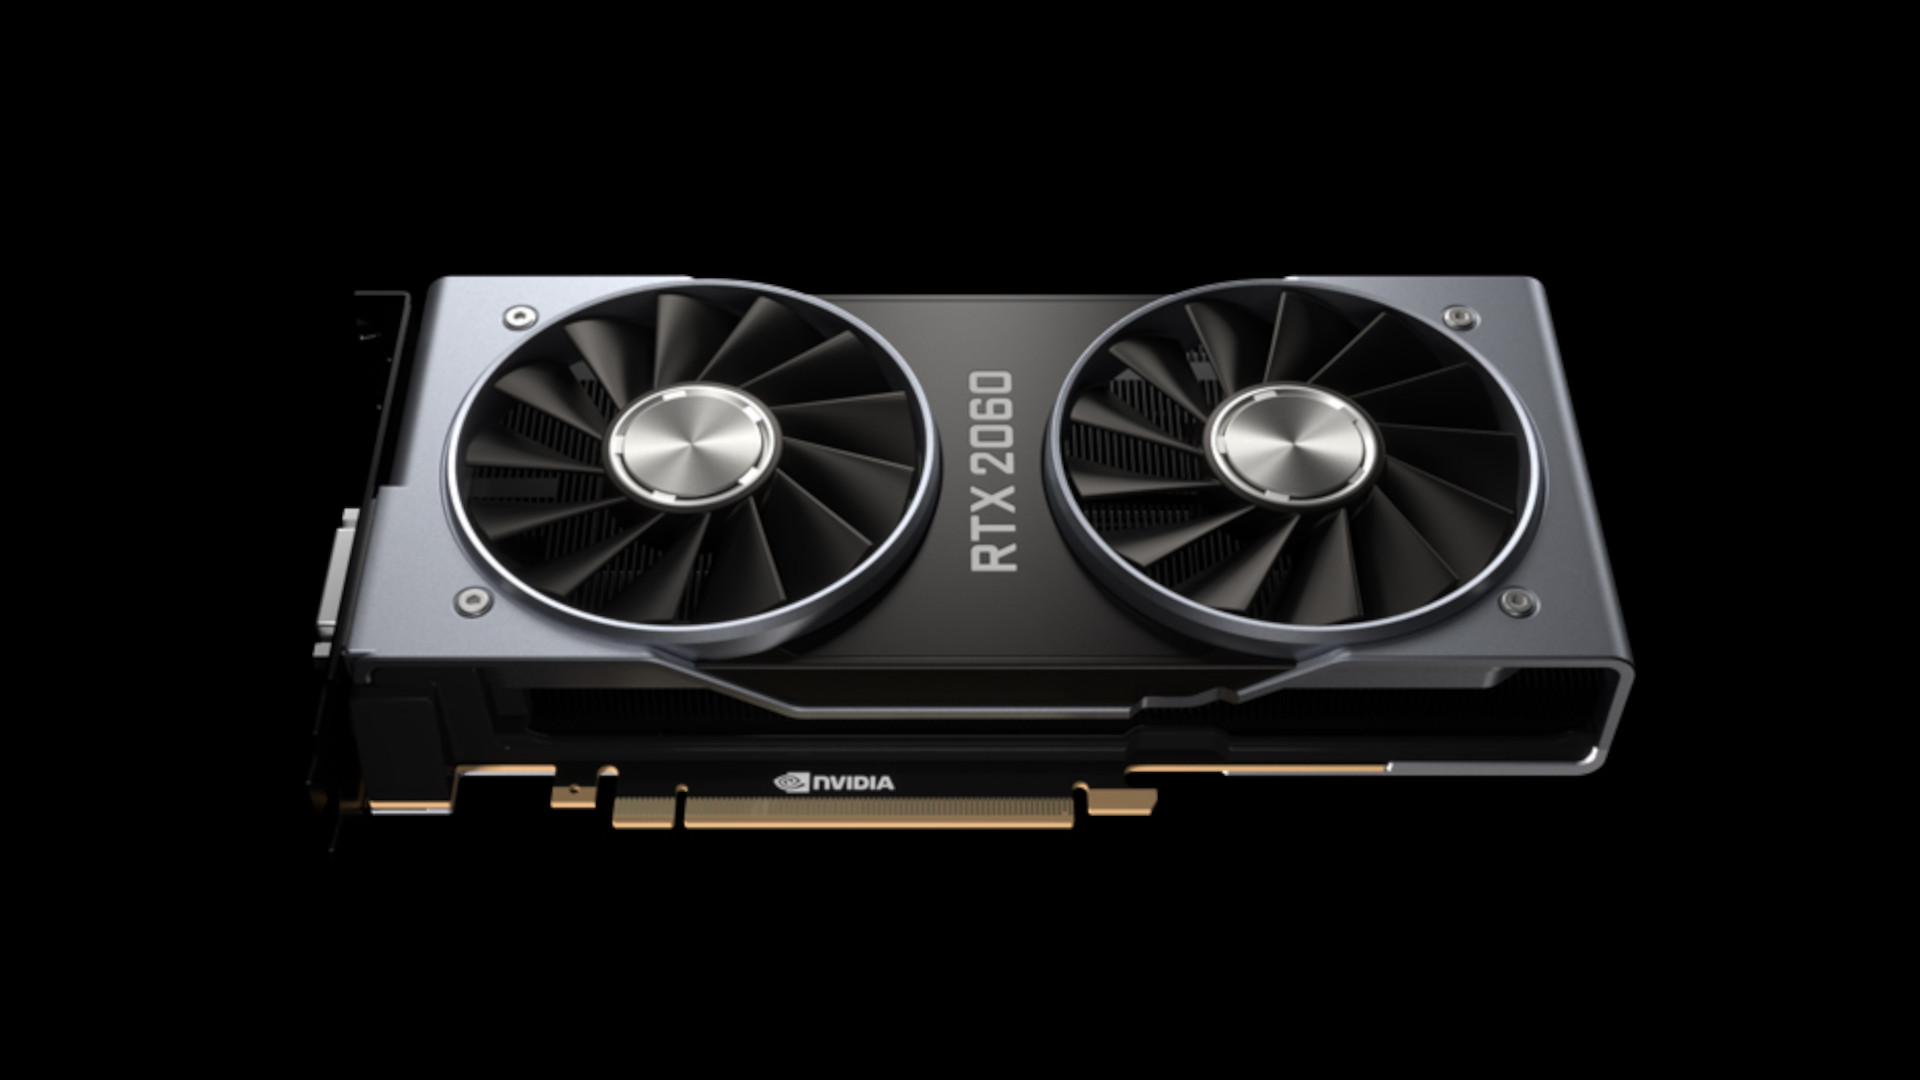 Retailers can’t list the RTX 2060 12GB, let alone sell it, because of insufficient stock